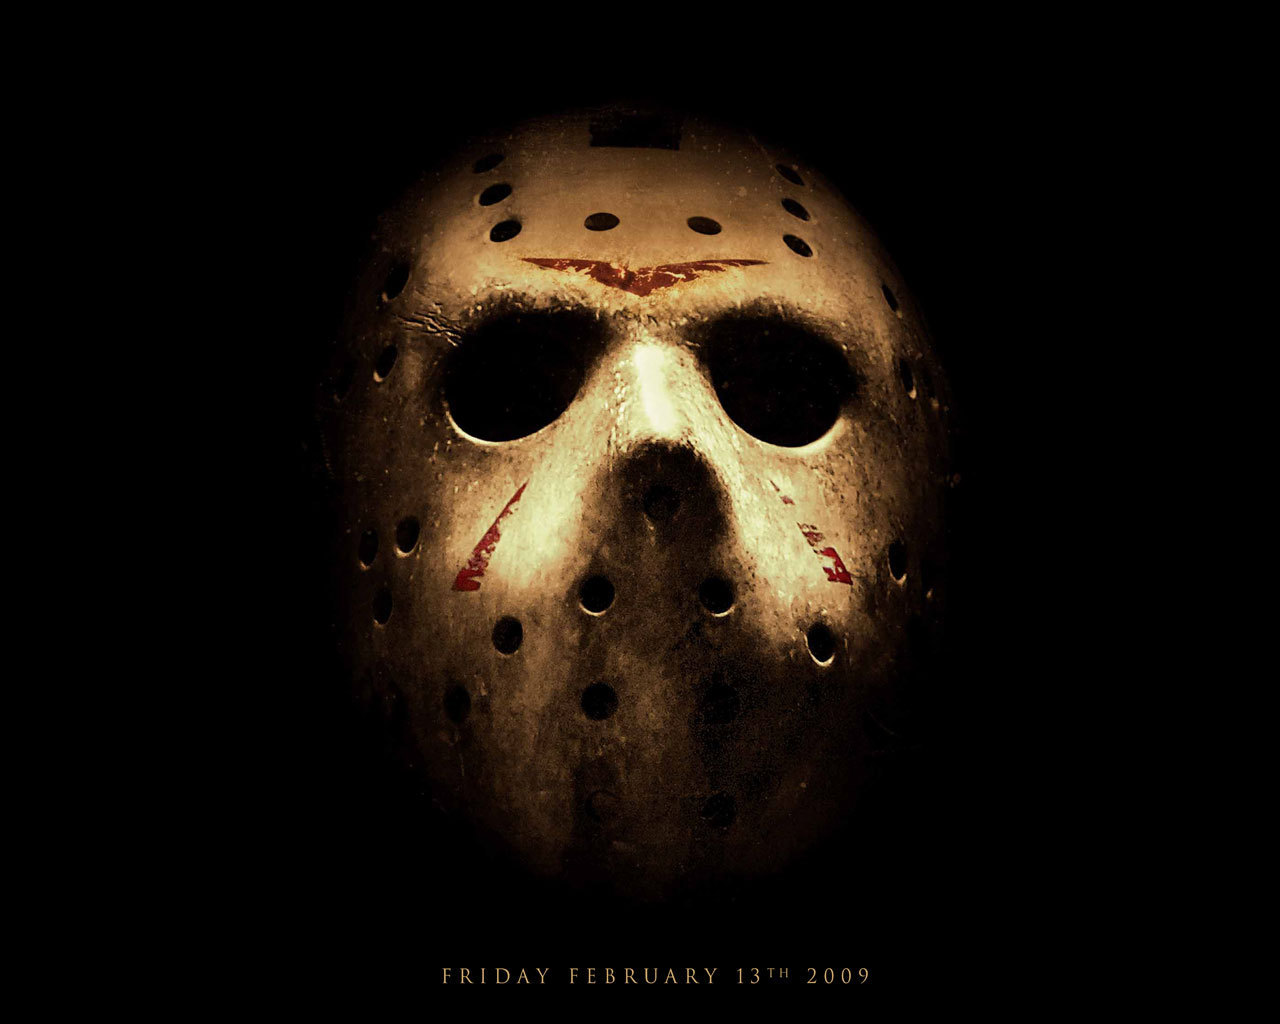 New Friday The 13th Wallpaper - Friday The 13th - HD Wallpaper 